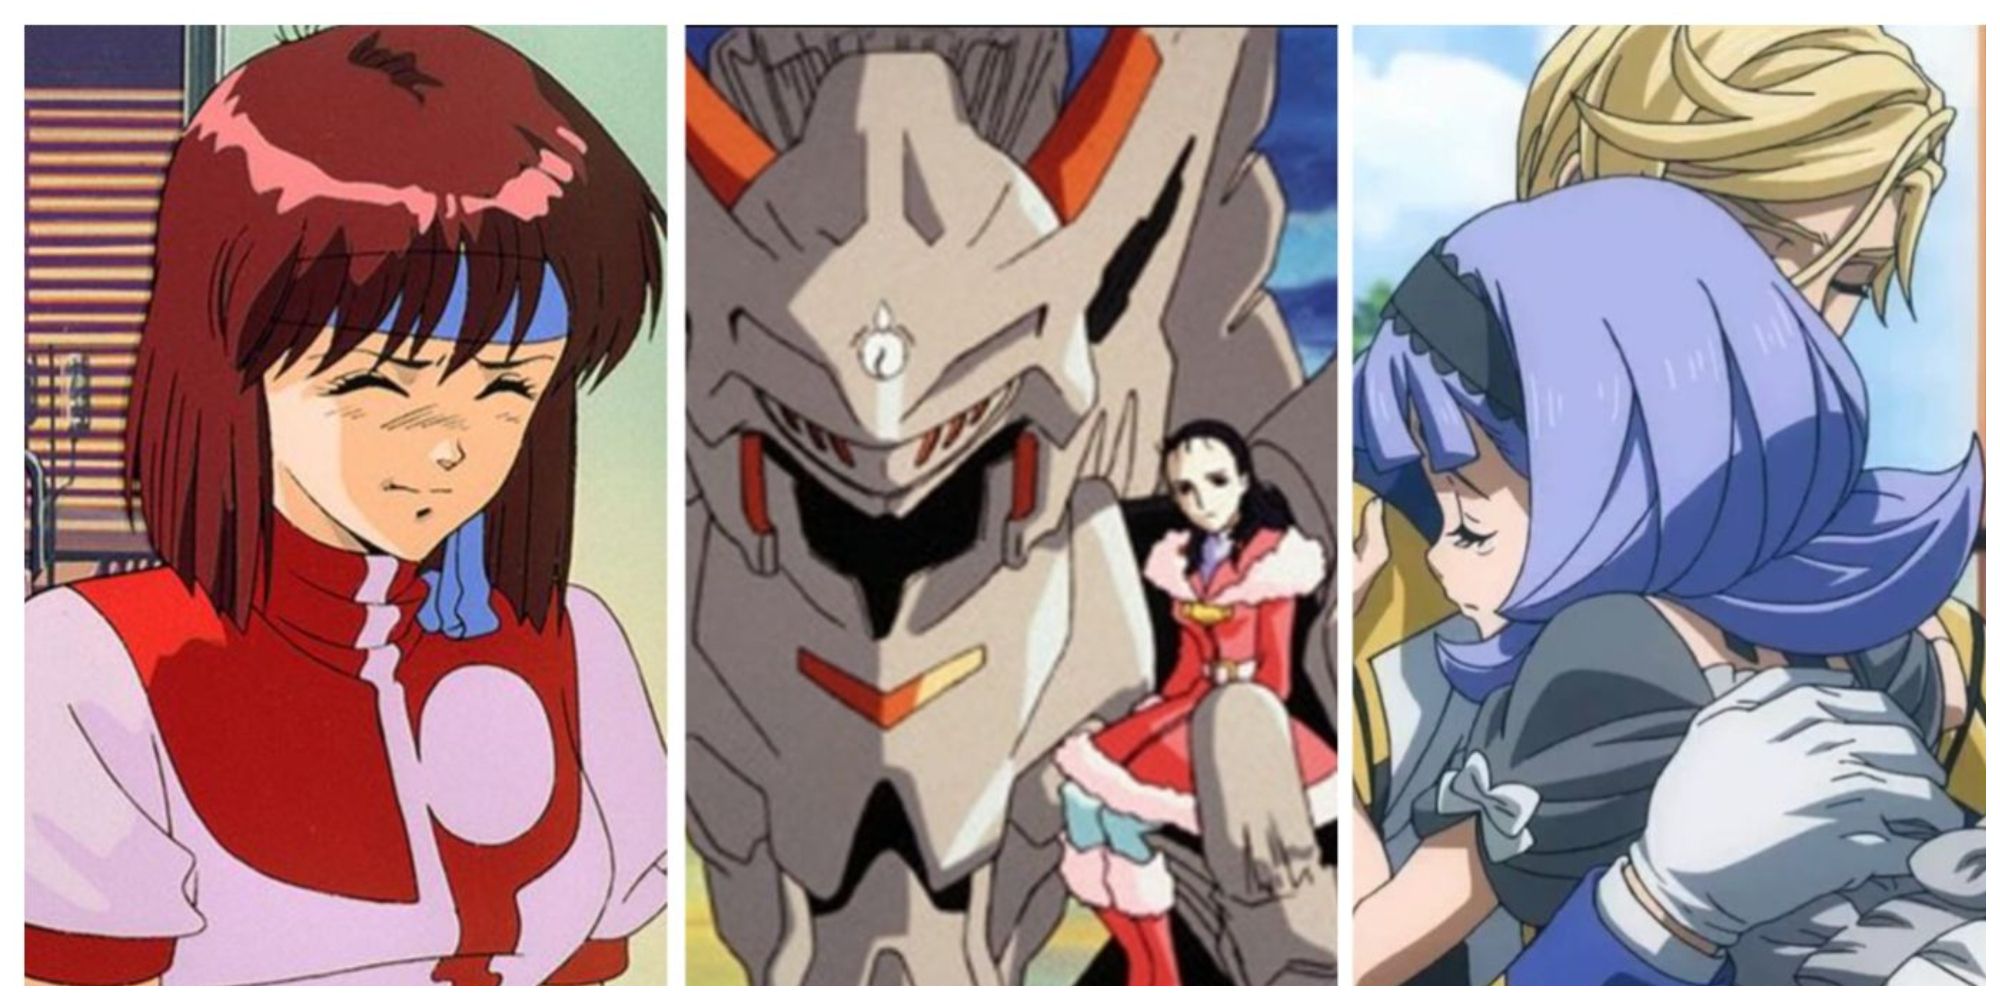 Feature-image-mecha-pilots-Gunbuster-Brain-Powered-Iron-Blooded-Orphans